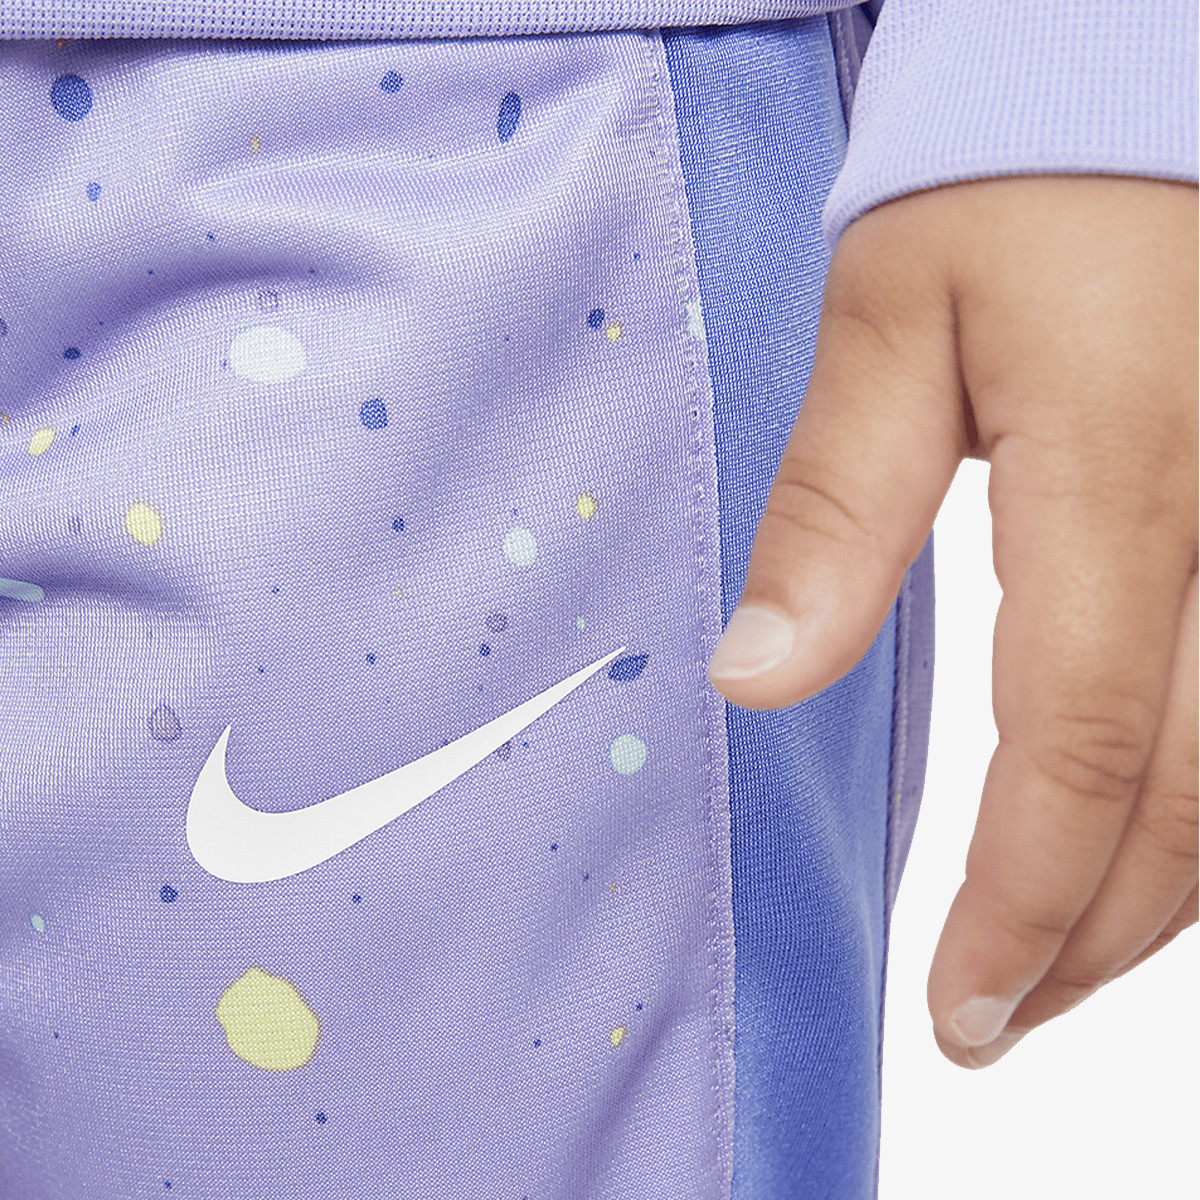 Nike All Over Print Tricot 